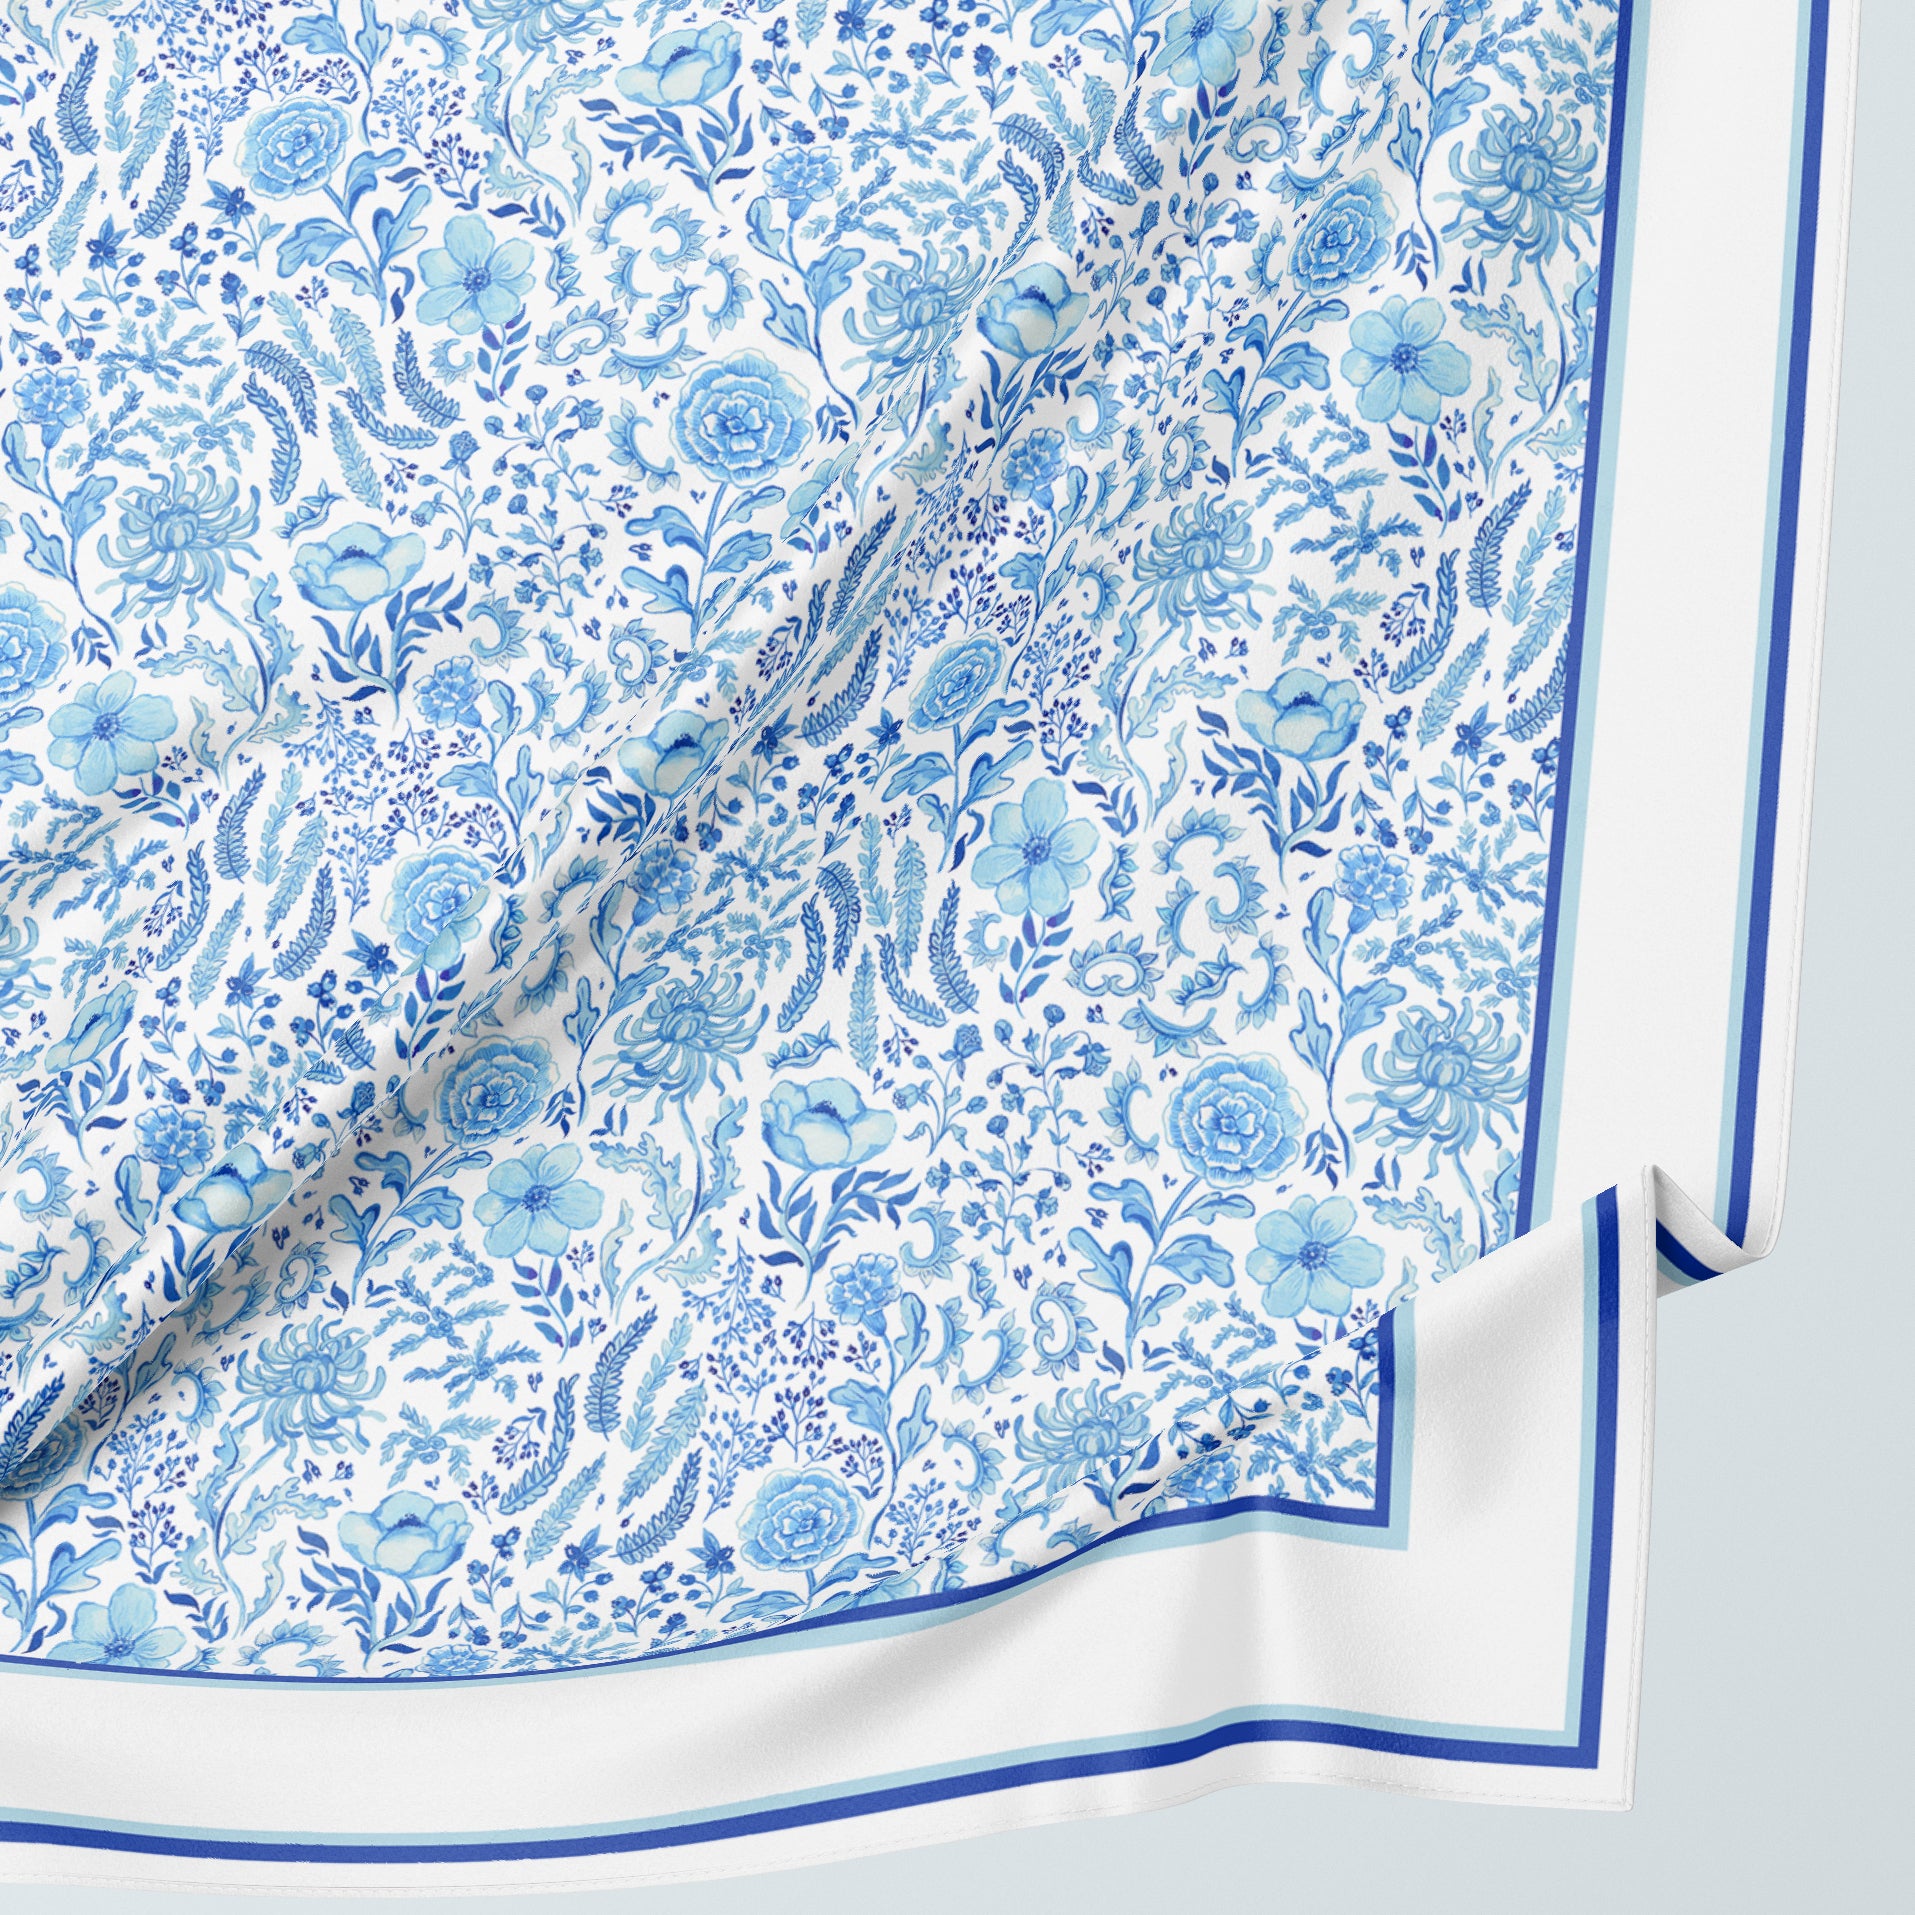 Sophisticated silk scarf gift with a porcelain blue floral pattern by Darya Karenski